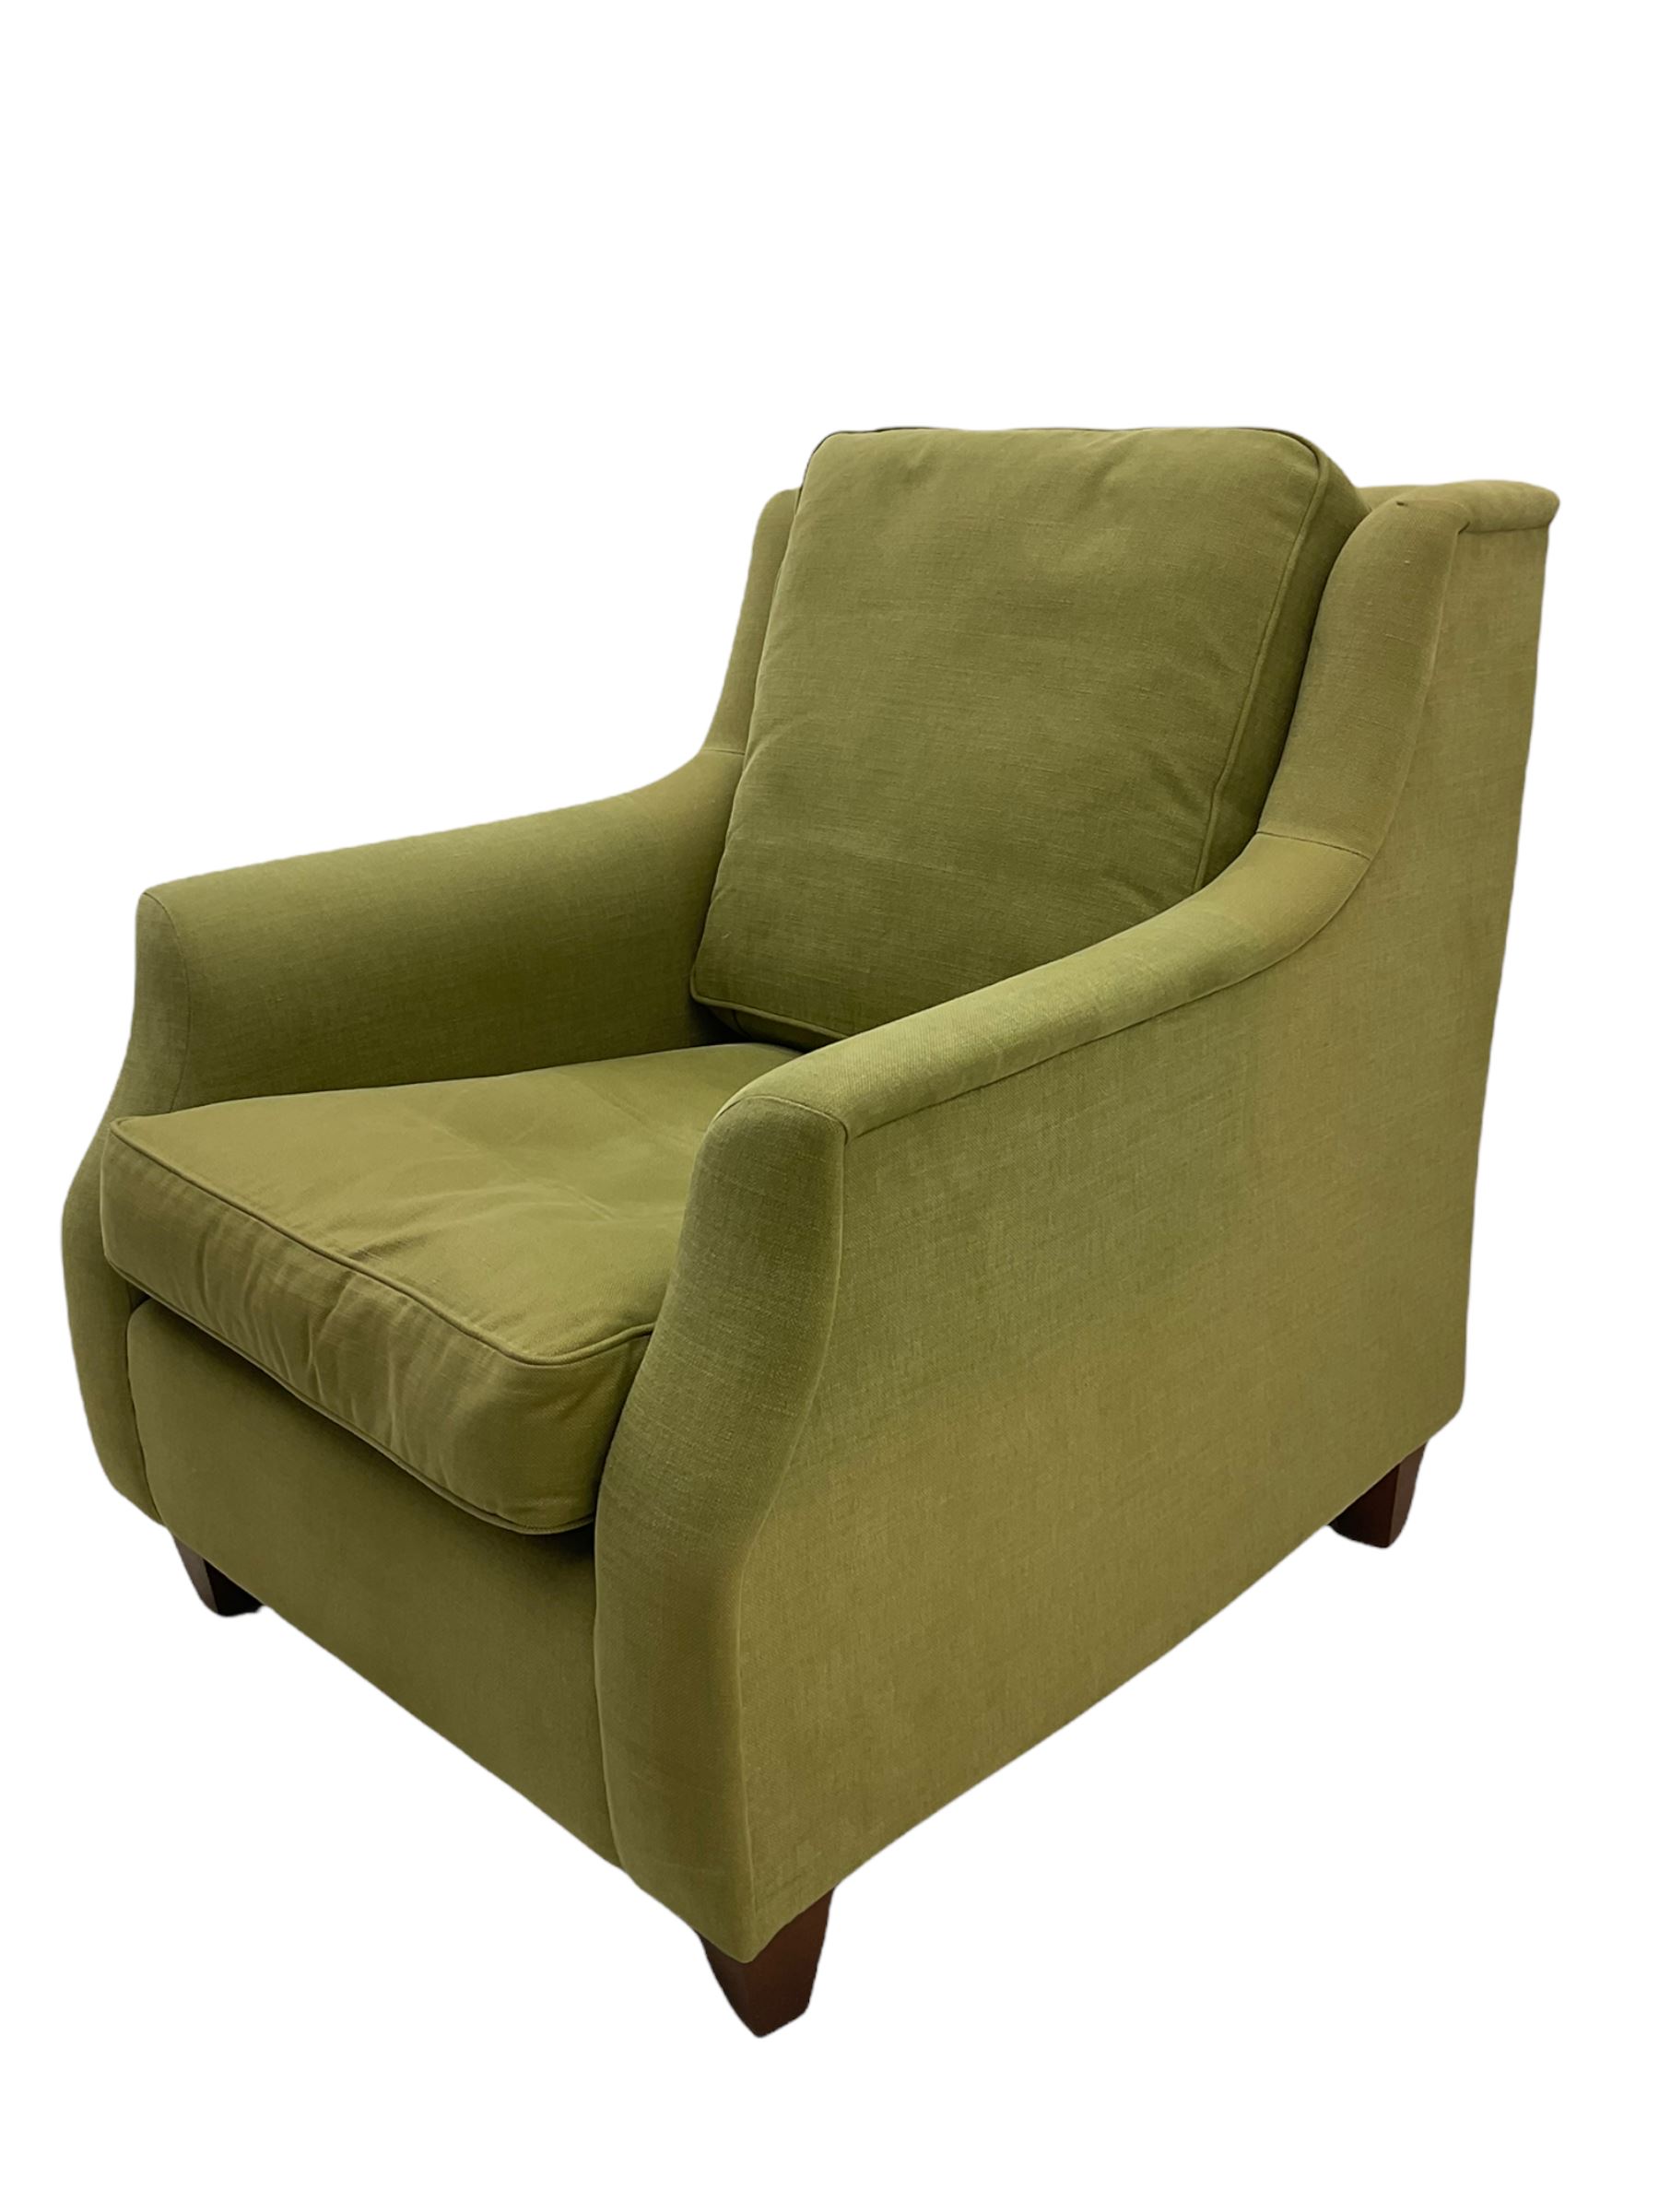 Wesley-Barrell two seat sofa and pair of matching armchairs - Image 19 of 20